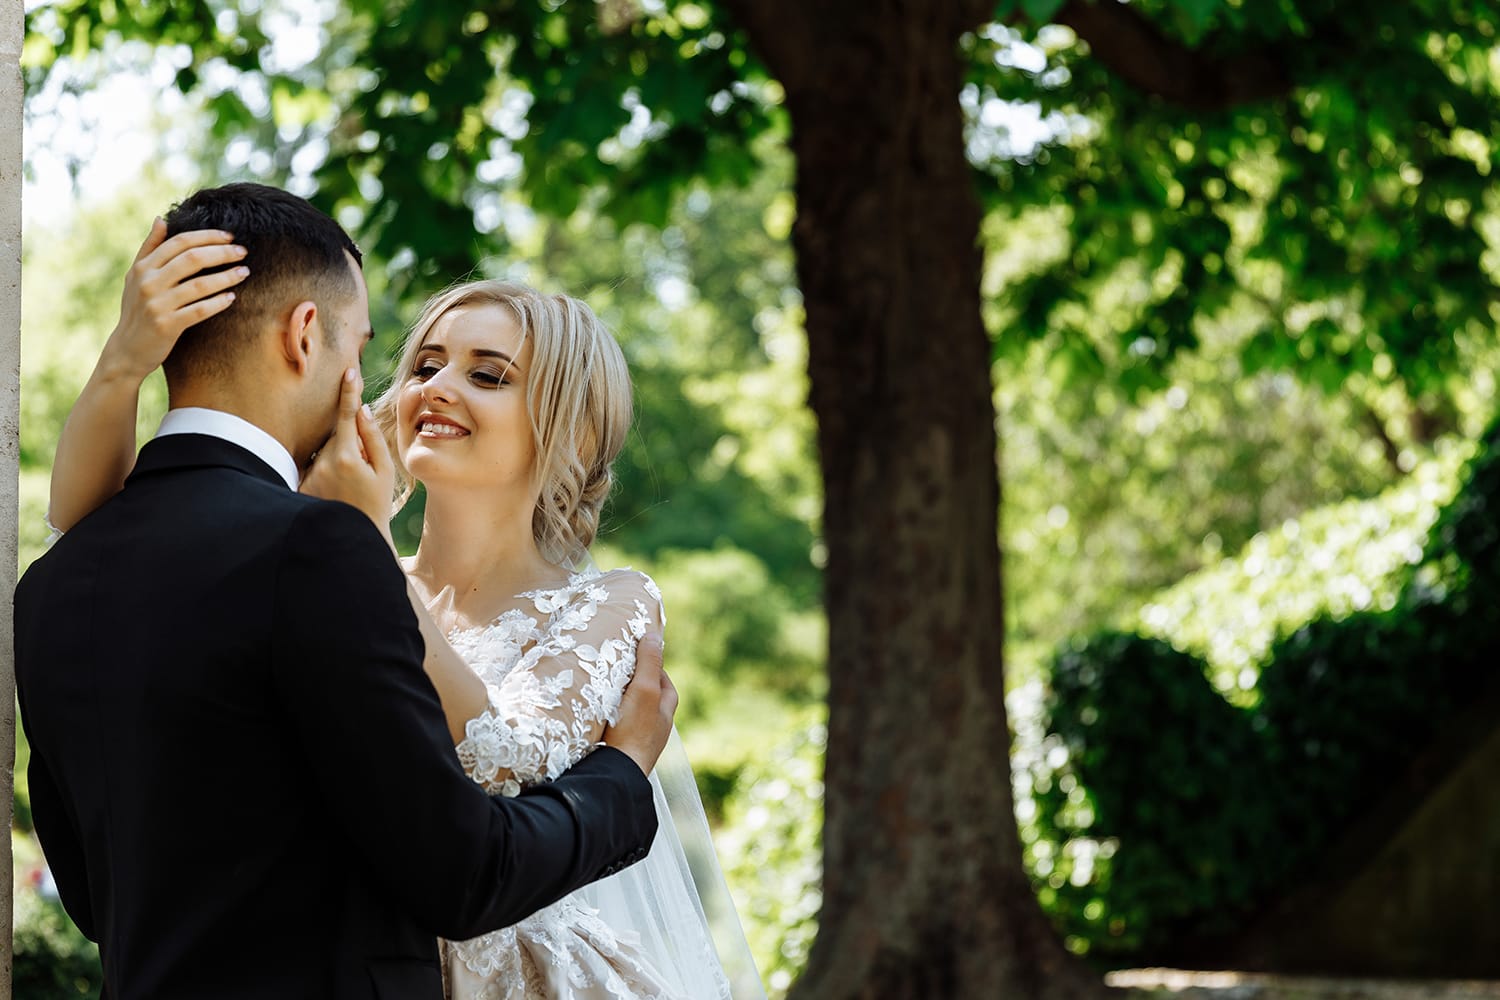 An Introduction Guide to Wedding Photography